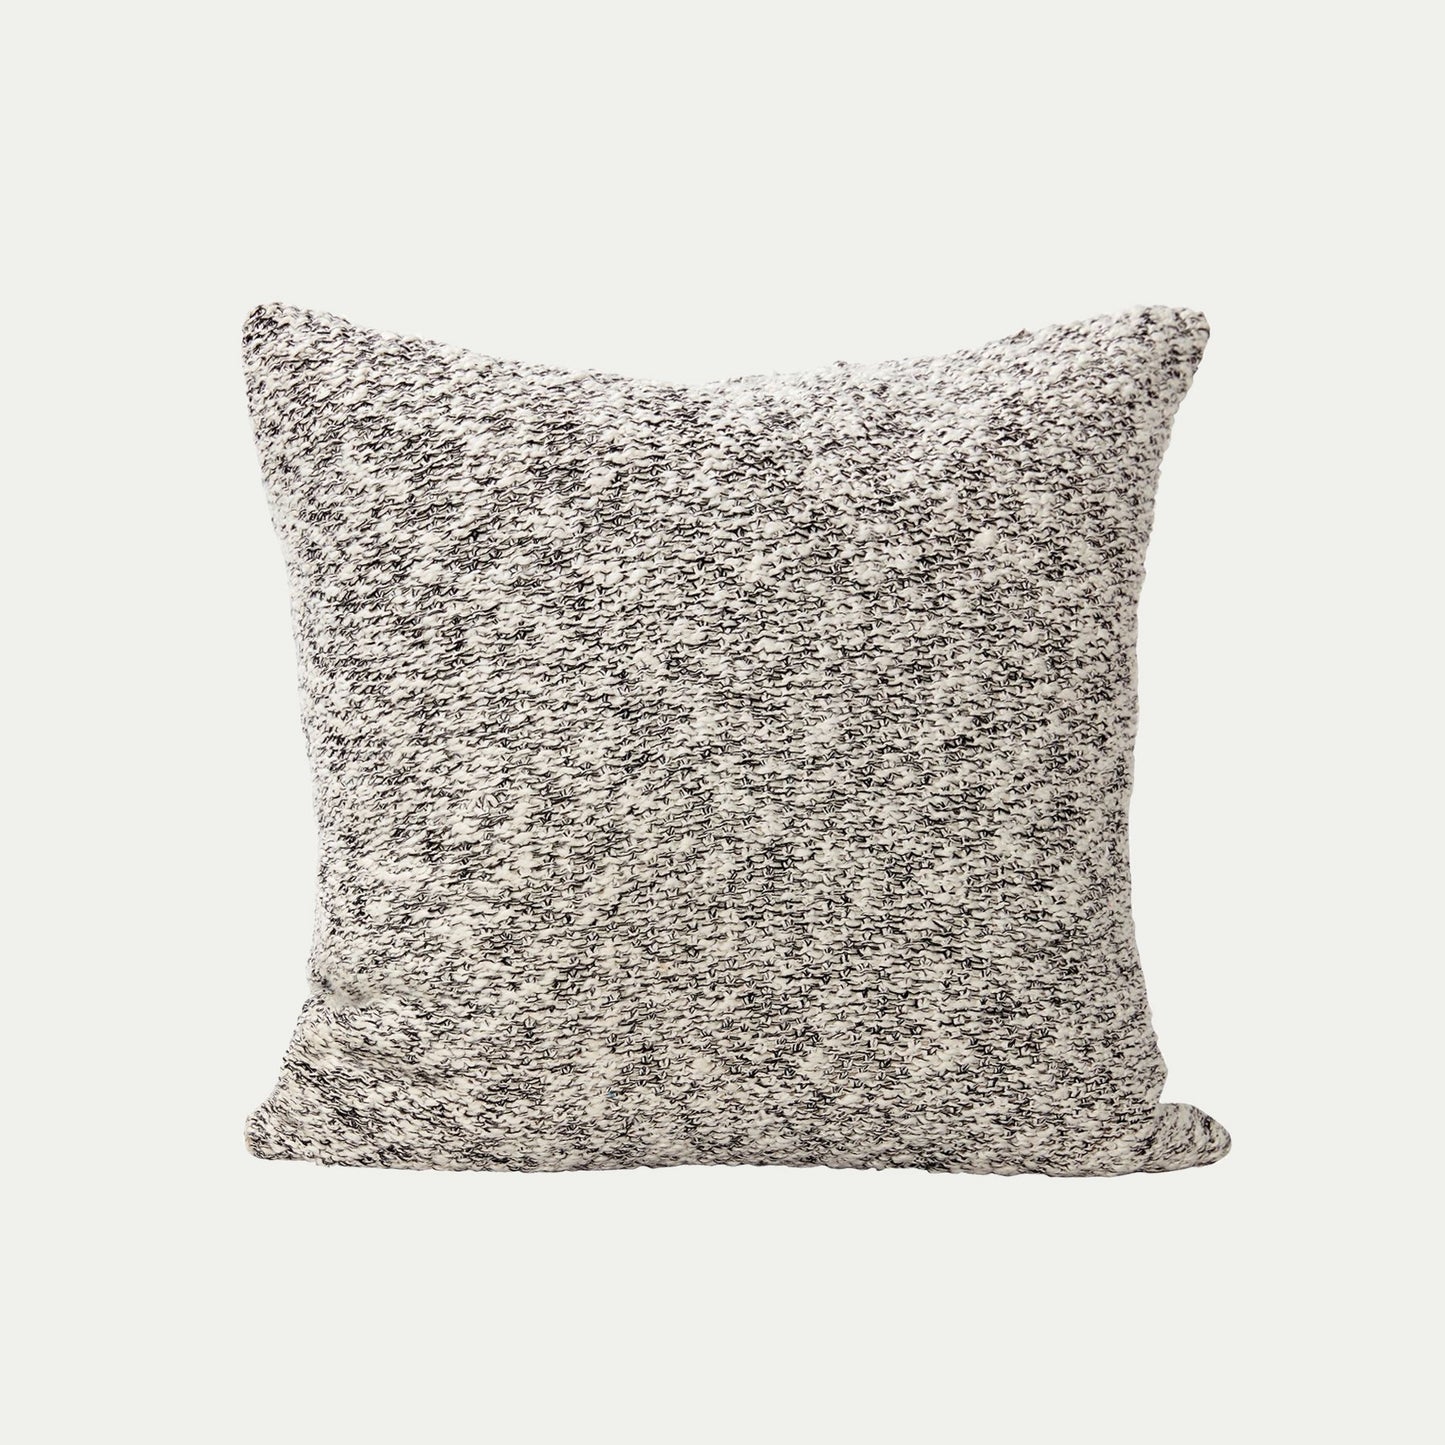 Hubsch Interior large 60 x 60 boucle cushion in grey, white and cream on white background